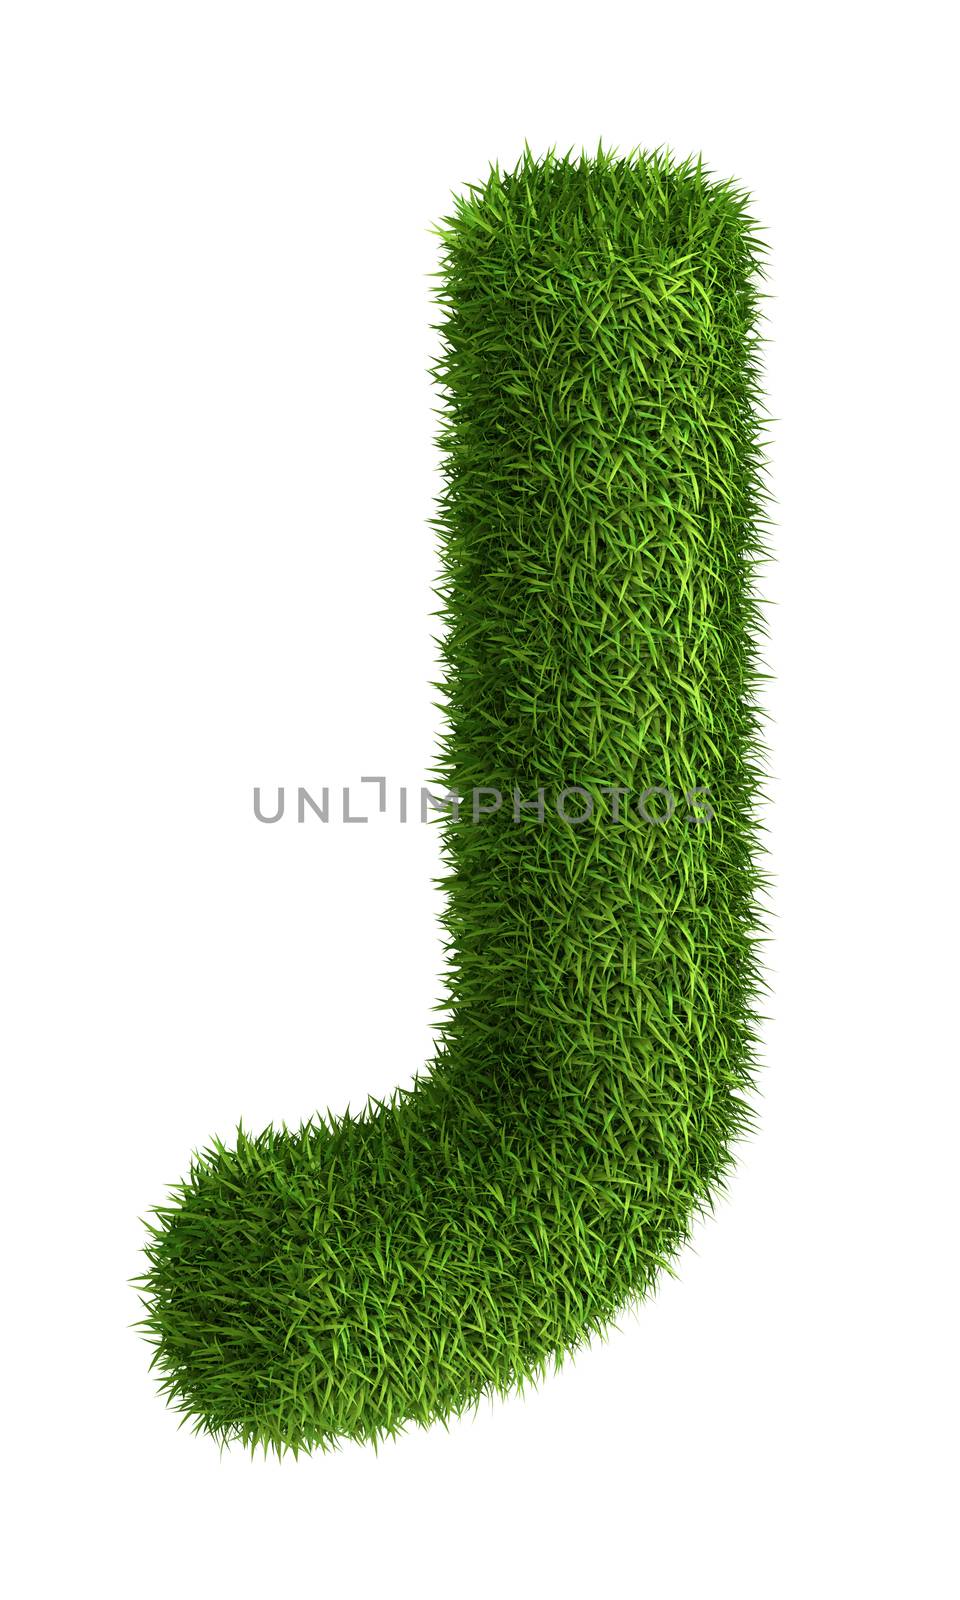 Natural grass letter J by iunewind